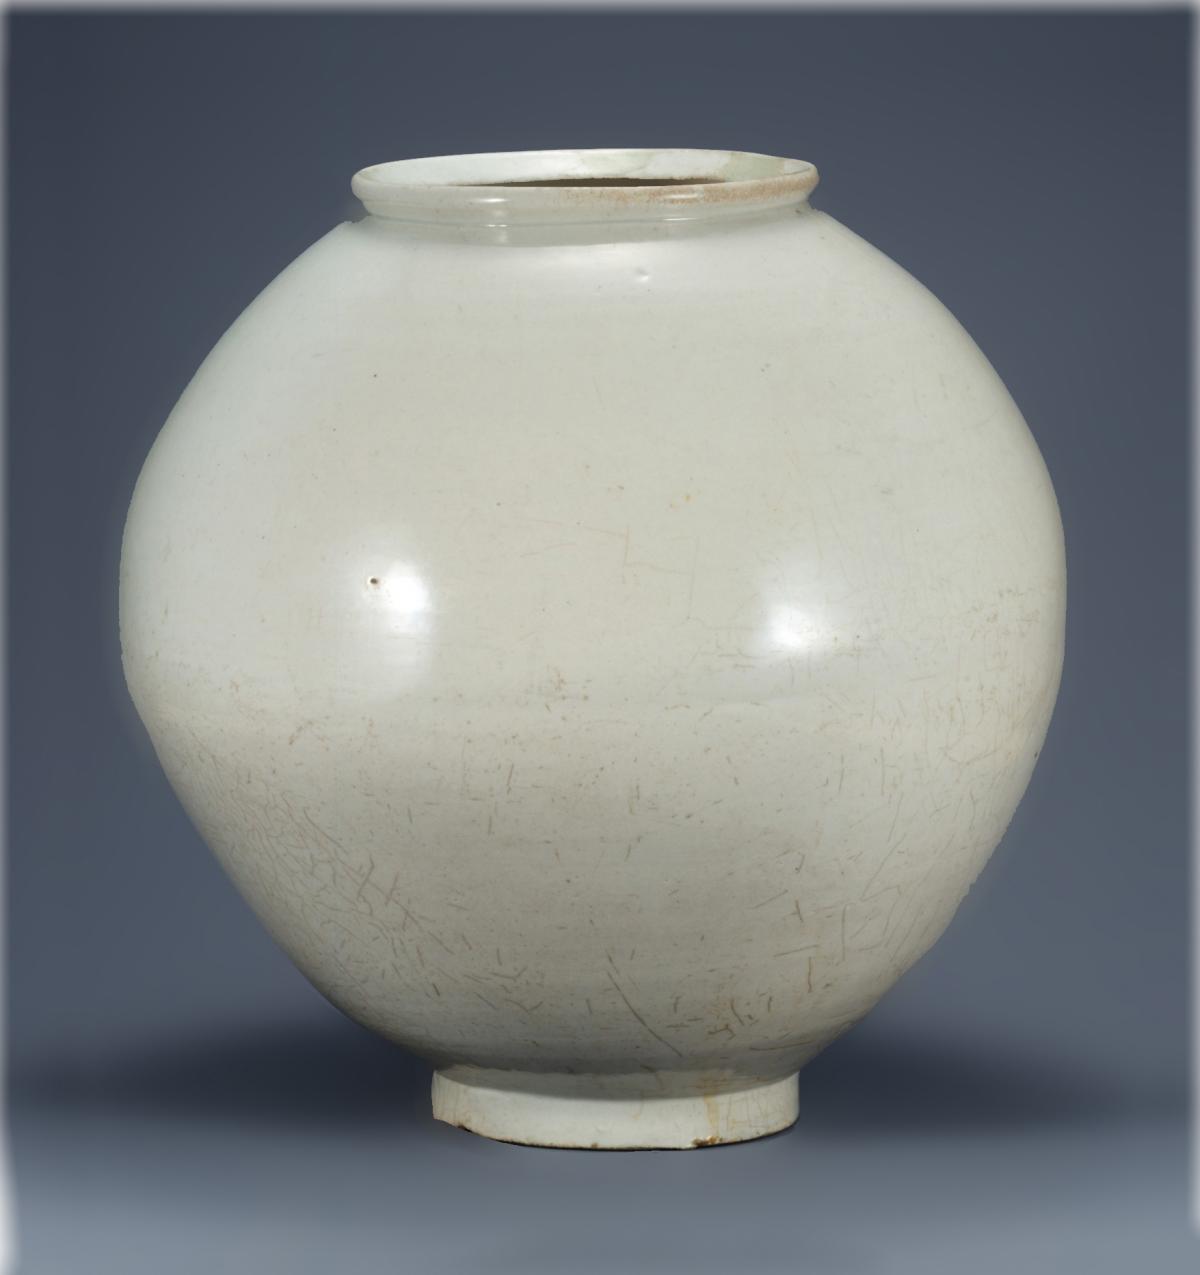 White porcelain jar, wide in the middle, with a narrower mouth and base